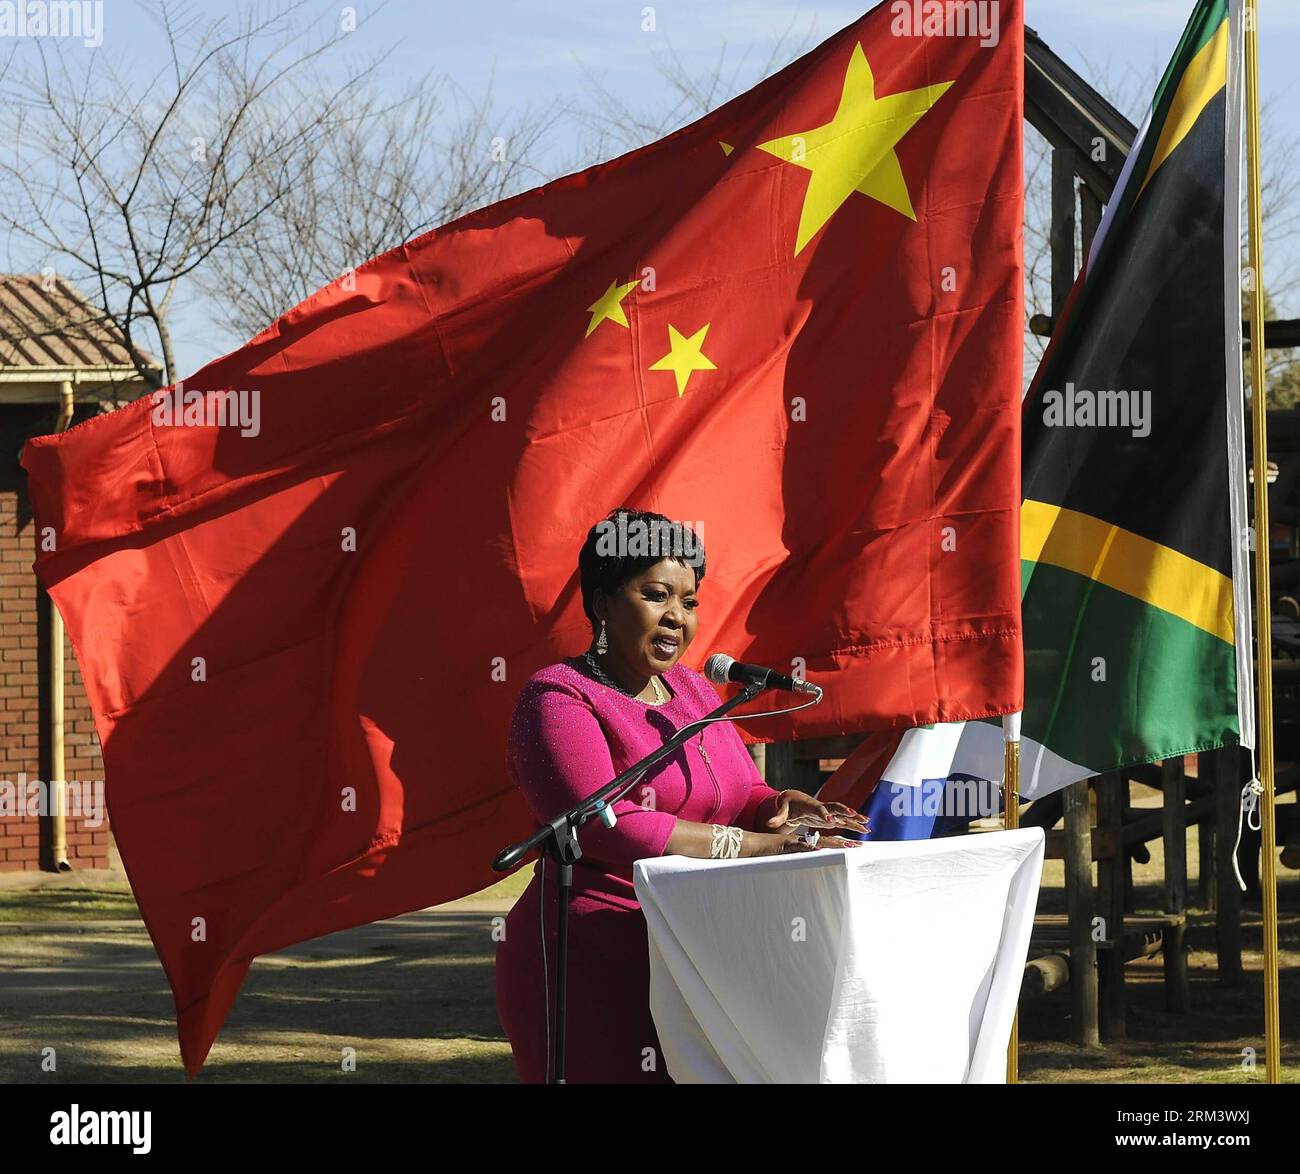 Bildnummer: 60337260  Datum: 07.08.2013  Copyright: imago/Xinhua Bongi Ngema-Zuma, wife of South African President Jacob Zuma, speaks during a donation ceremony for solar water heaters in Pretoria, Aug. 7, 2013. Chinese Embassy in South Africa Wednesday donated a number of solar water heaters to Mamelodi SOS Children s Village in Pretoria, which can save about 70,000 U.S. dollars from electricity fee a year. (Xinhua/Li Qihua) SOUTH AFRICA-PRETORIA-CHINA-DONATION PUBLICATIONxNOTxINxCHN People xns x0x 2013 quadrat     60337260 Date 07 08 2013 Copyright Imago XINHUA  Ngema Zuma wife of South Afri Stock Photo